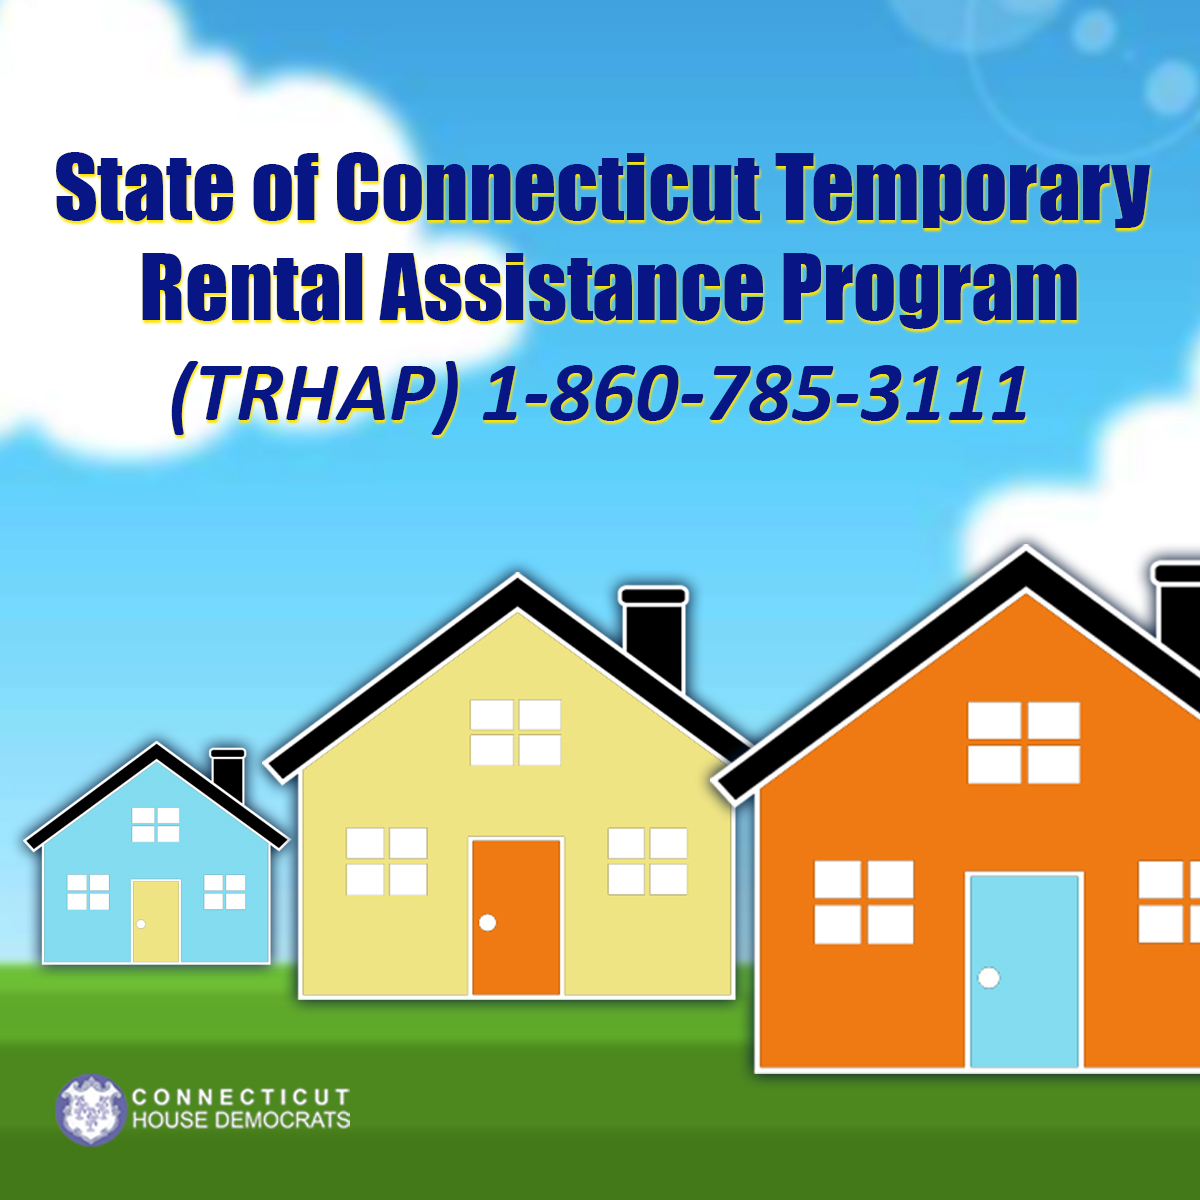 Call 1-860-785-3111 to see if you qualify for TRHAP